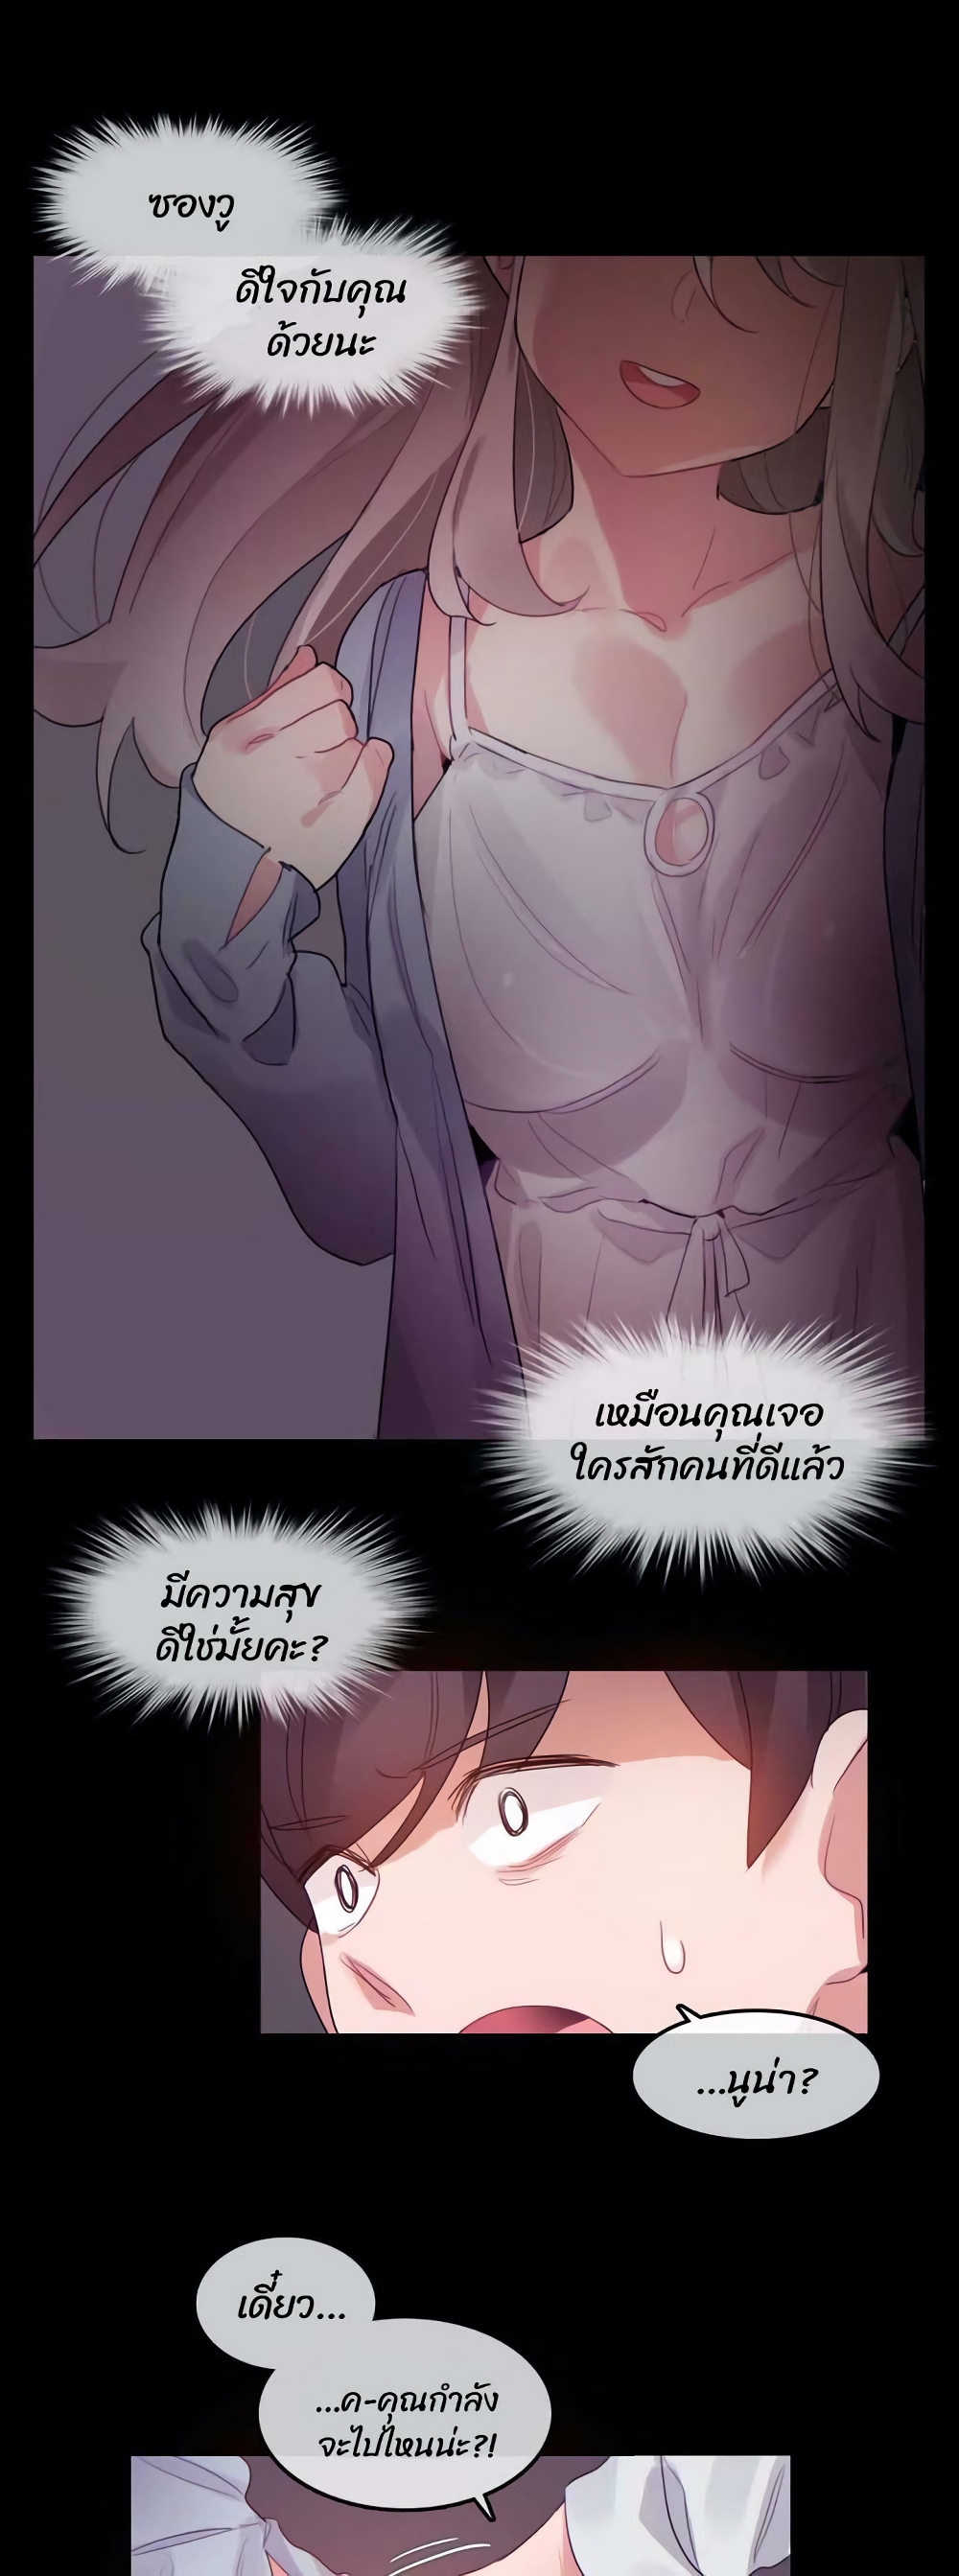 A Pervert's Daily Life 90 (1)